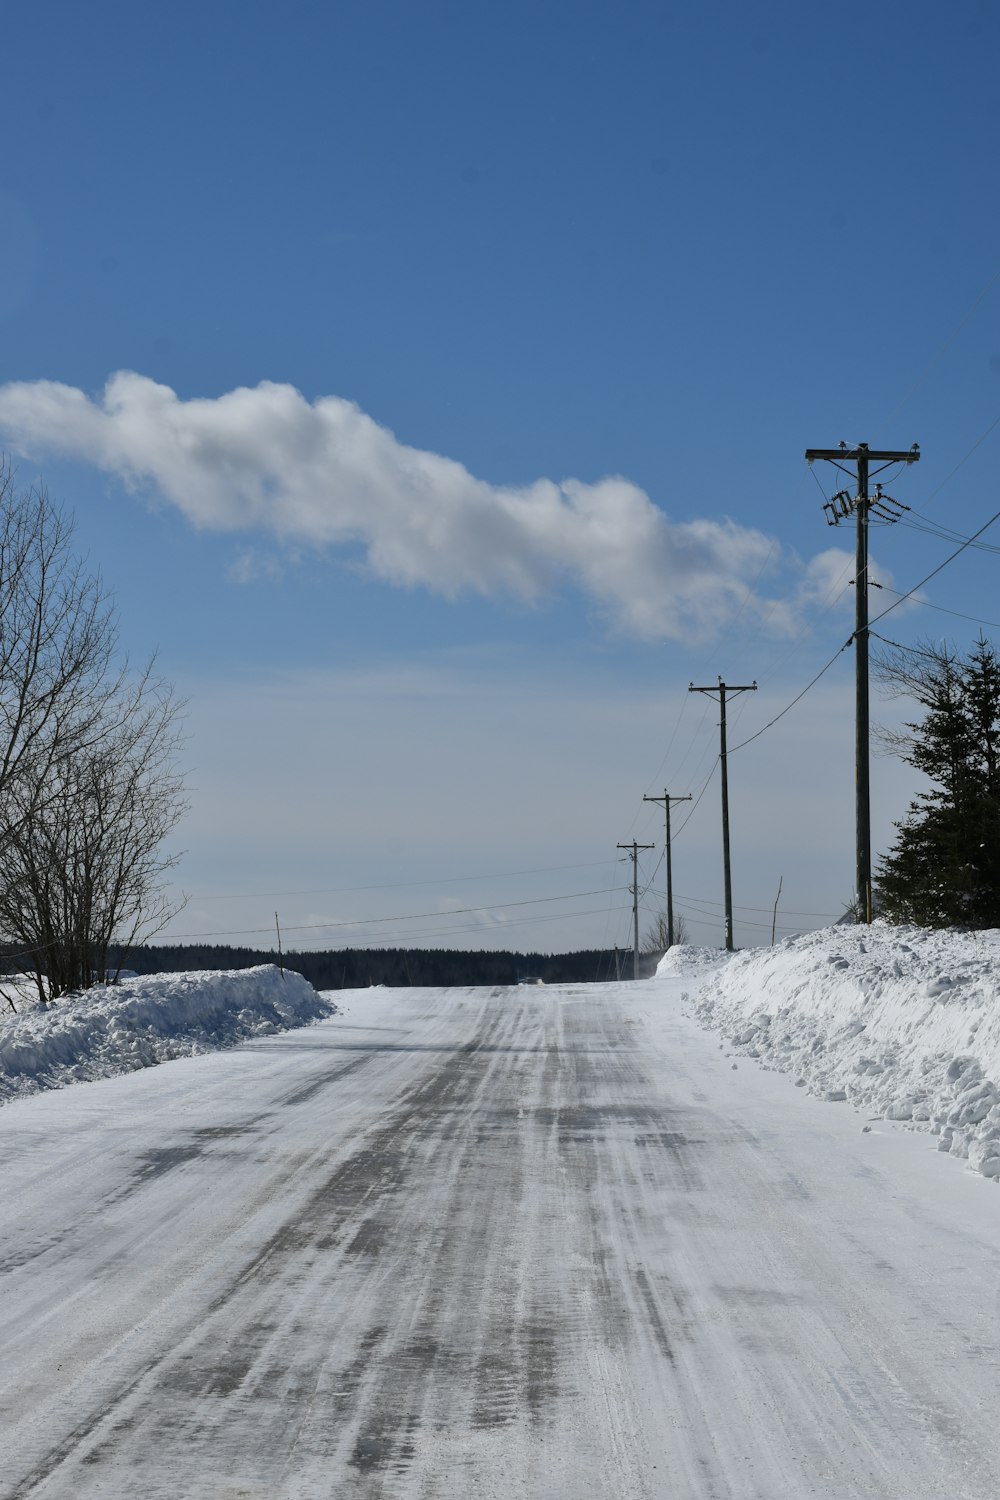 a snow covered road with power lines and telephone poles